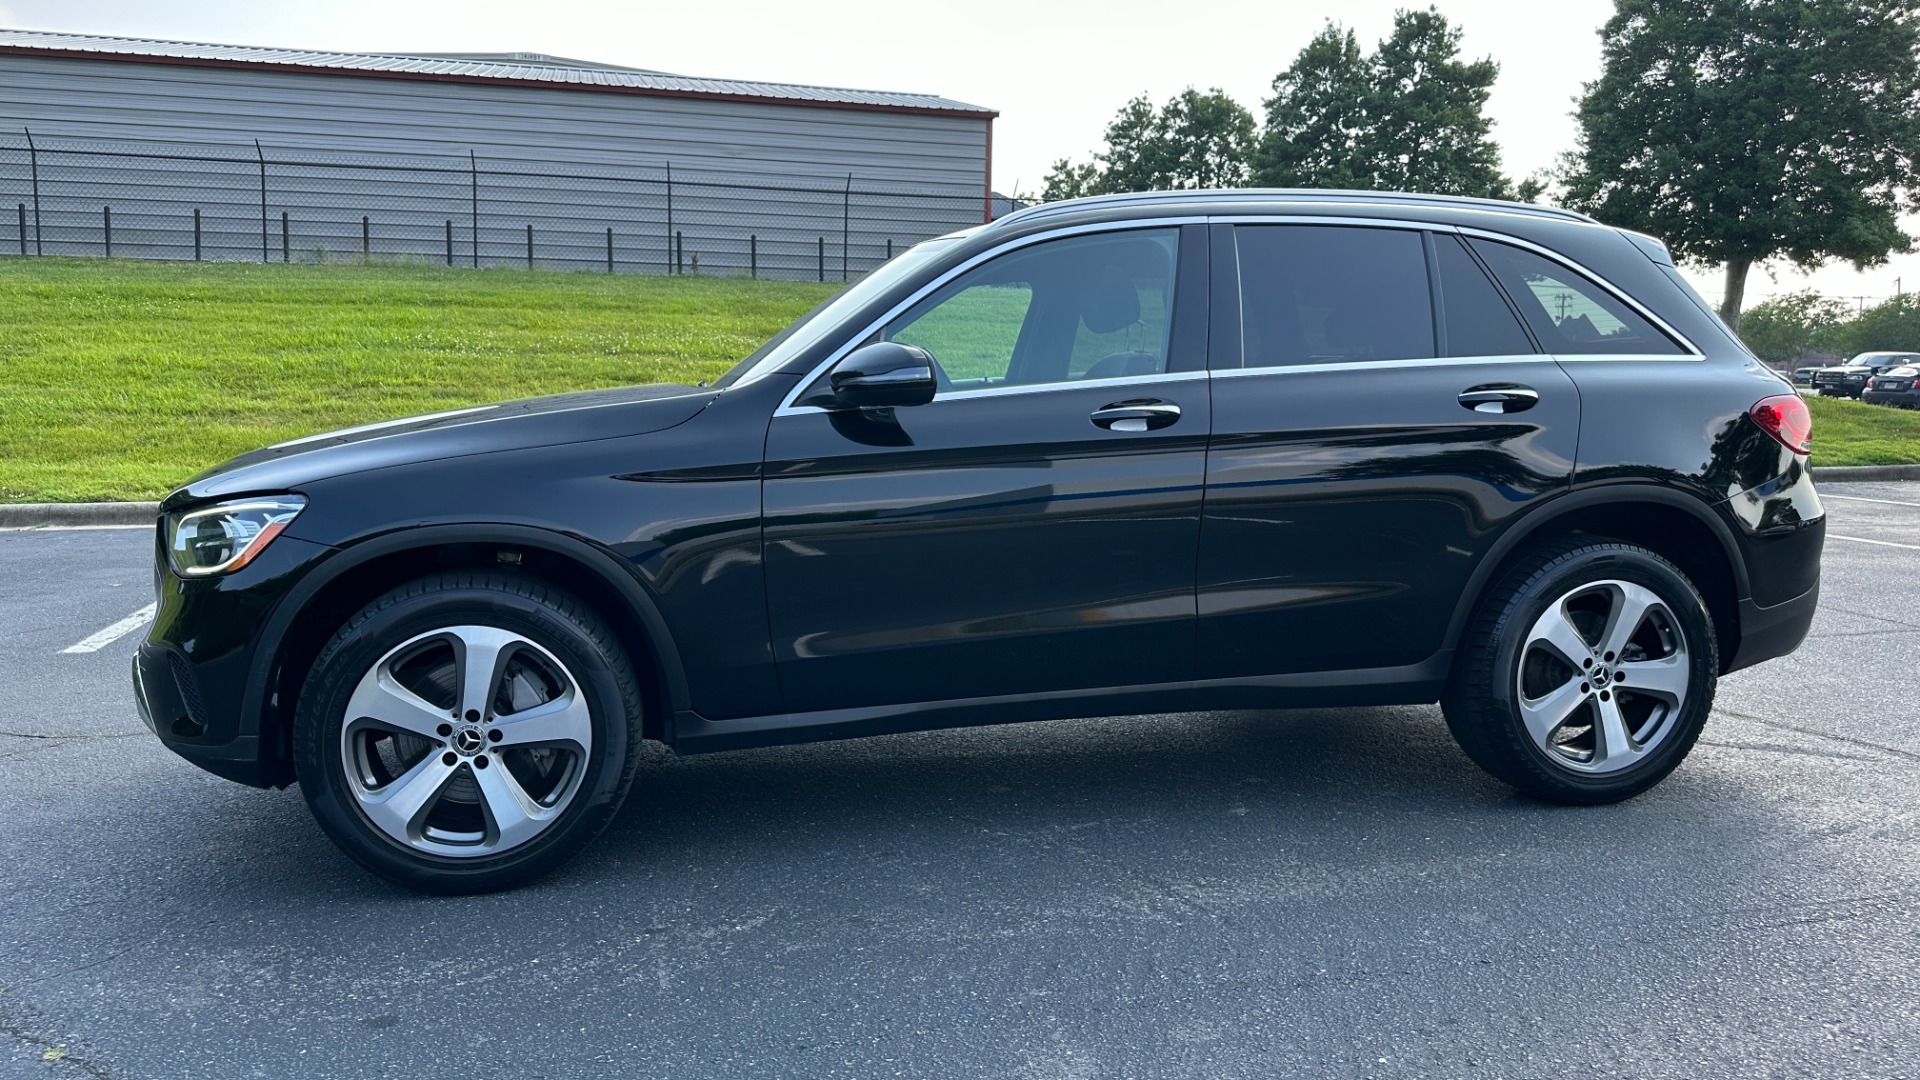 Used 2020 Mercedes-Benz GLC 300 / NAVIGATION / HEATED SEATS / BACKUP CAMERA for sale $34,495 at Formula Imports in Charlotte NC 28227 6